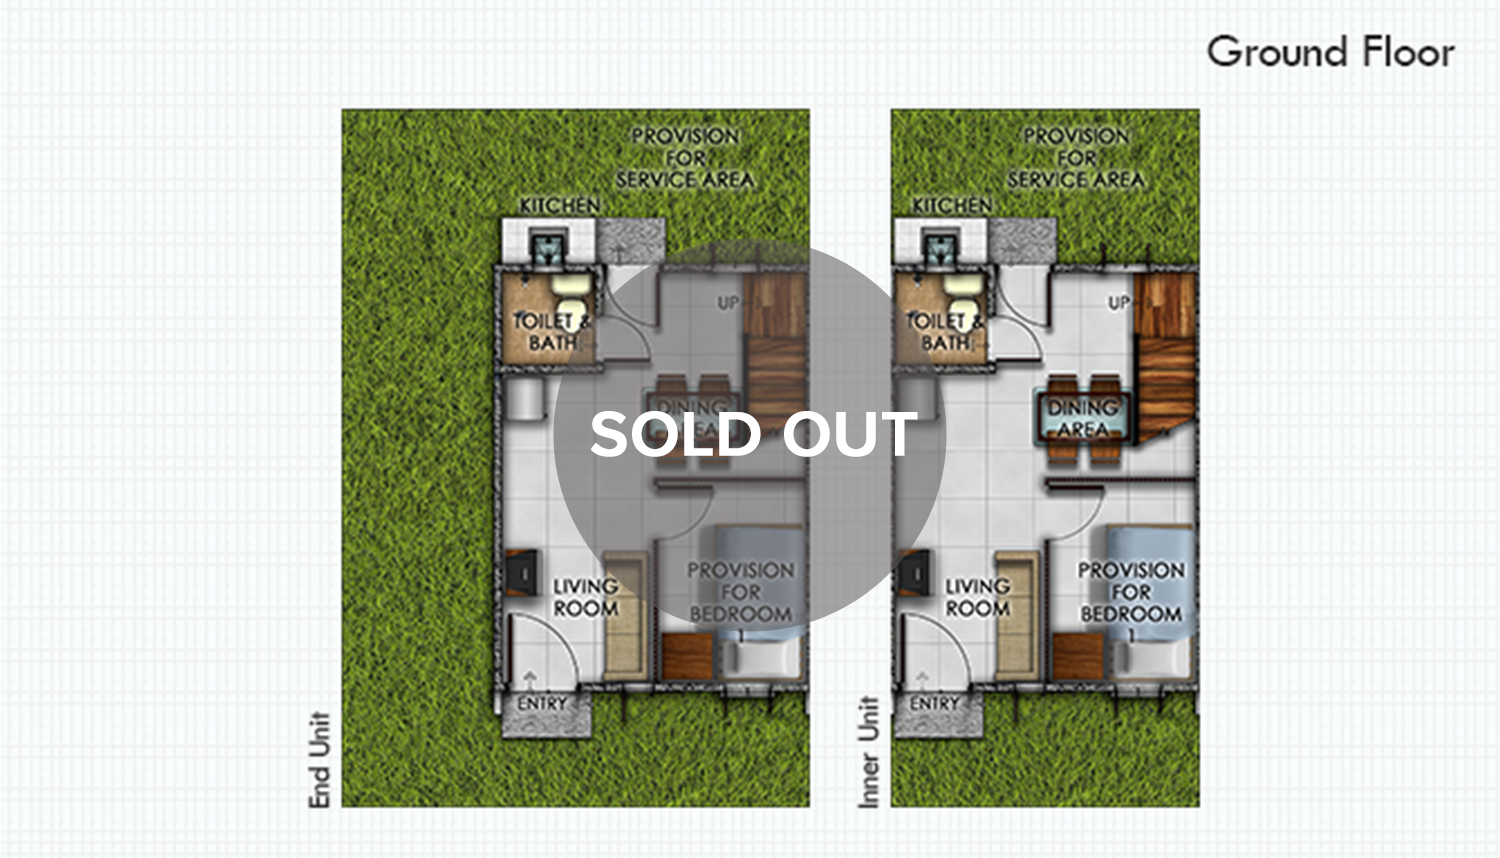 /assets/properties-house-model-gallery-and-landmarks-icons/lumina-home-models/home-model-gallery/alea-loft/lumina-alea-loft-ground-floor-plan-sold-out.png